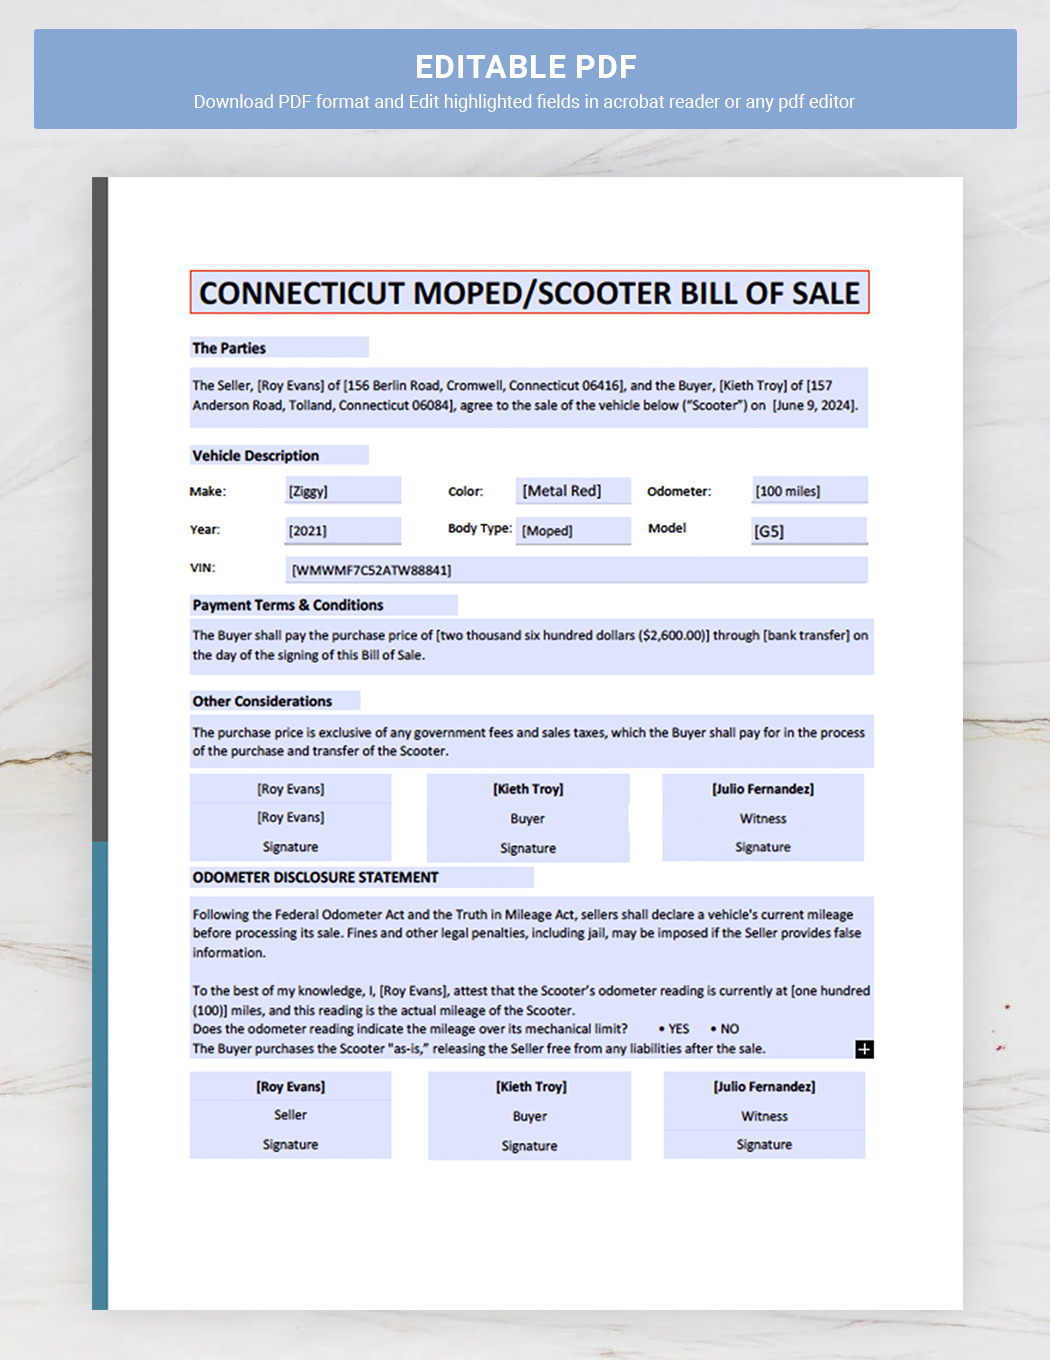 Connecticut Moped / Scooter Bill of Sale Template